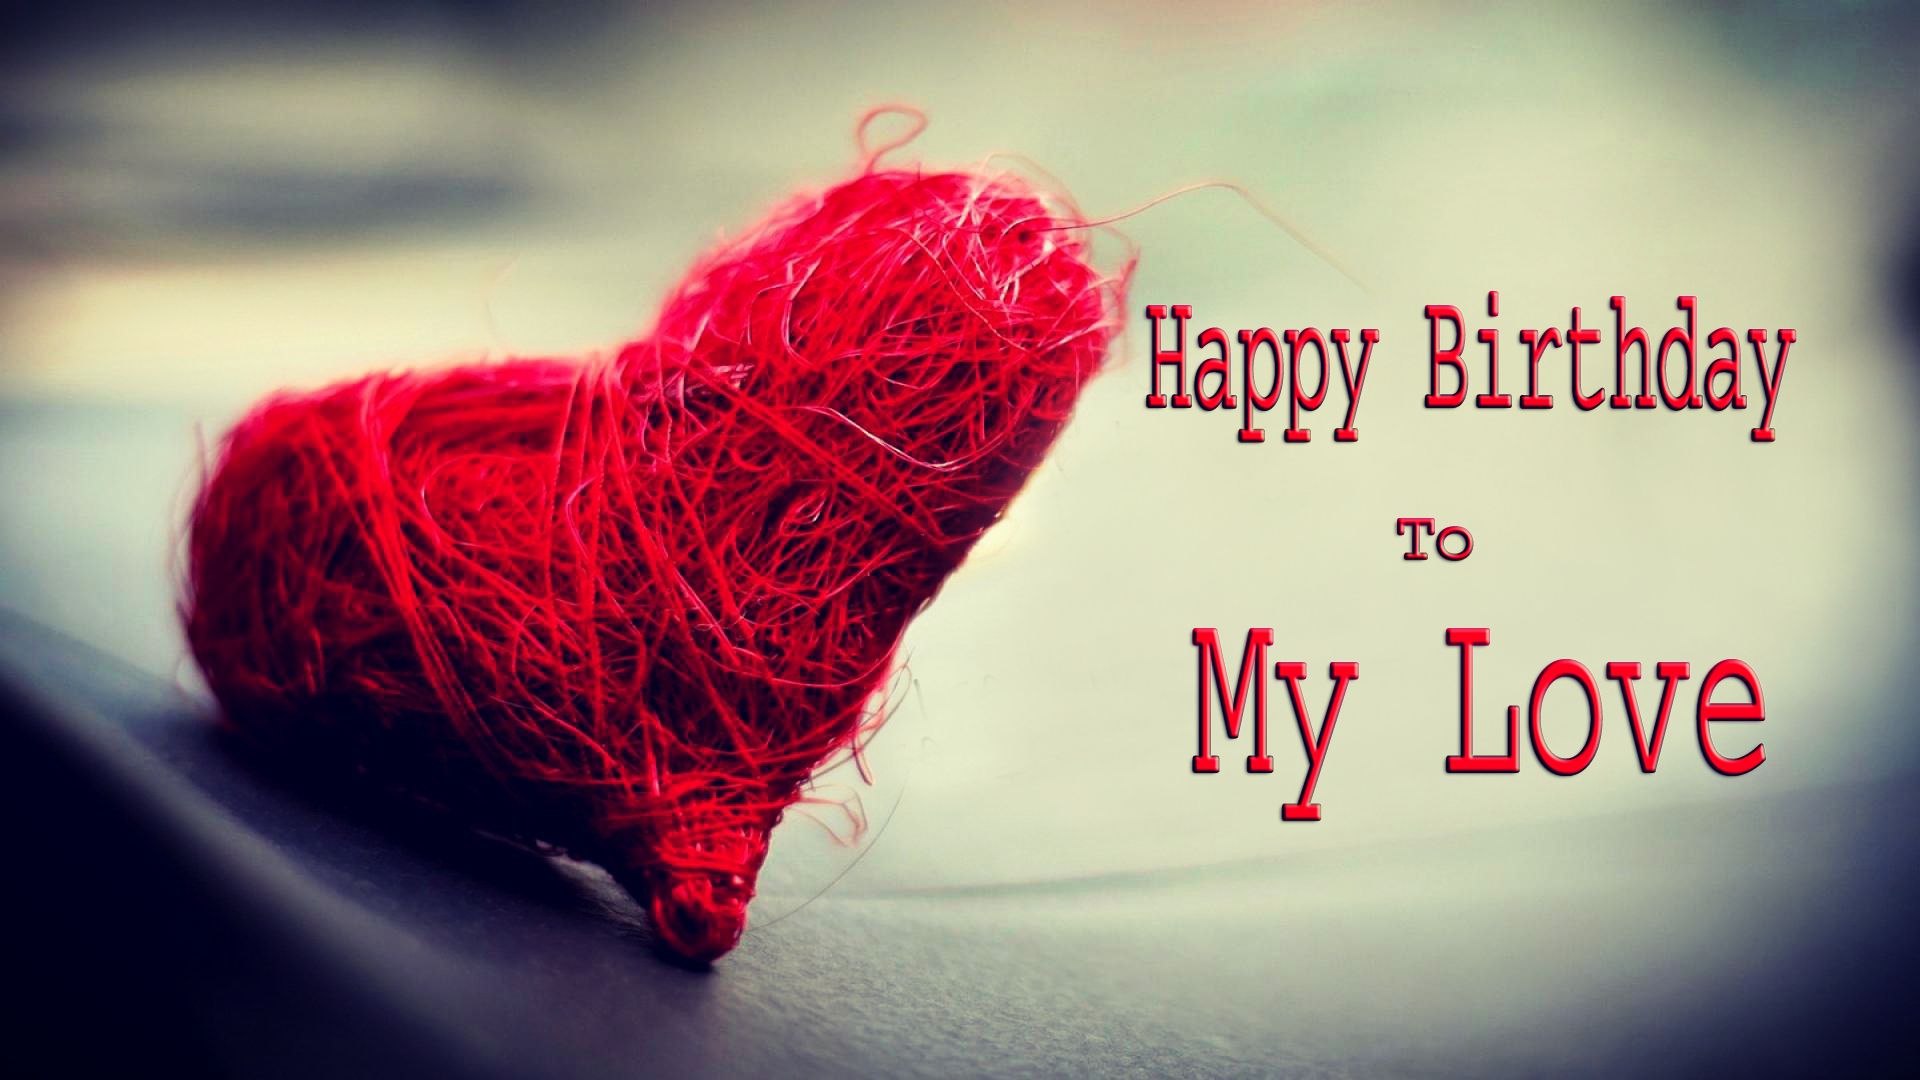  Birthday My Love One HD Wallpaper Pictures Backgrounds FREE Download 1920x1080